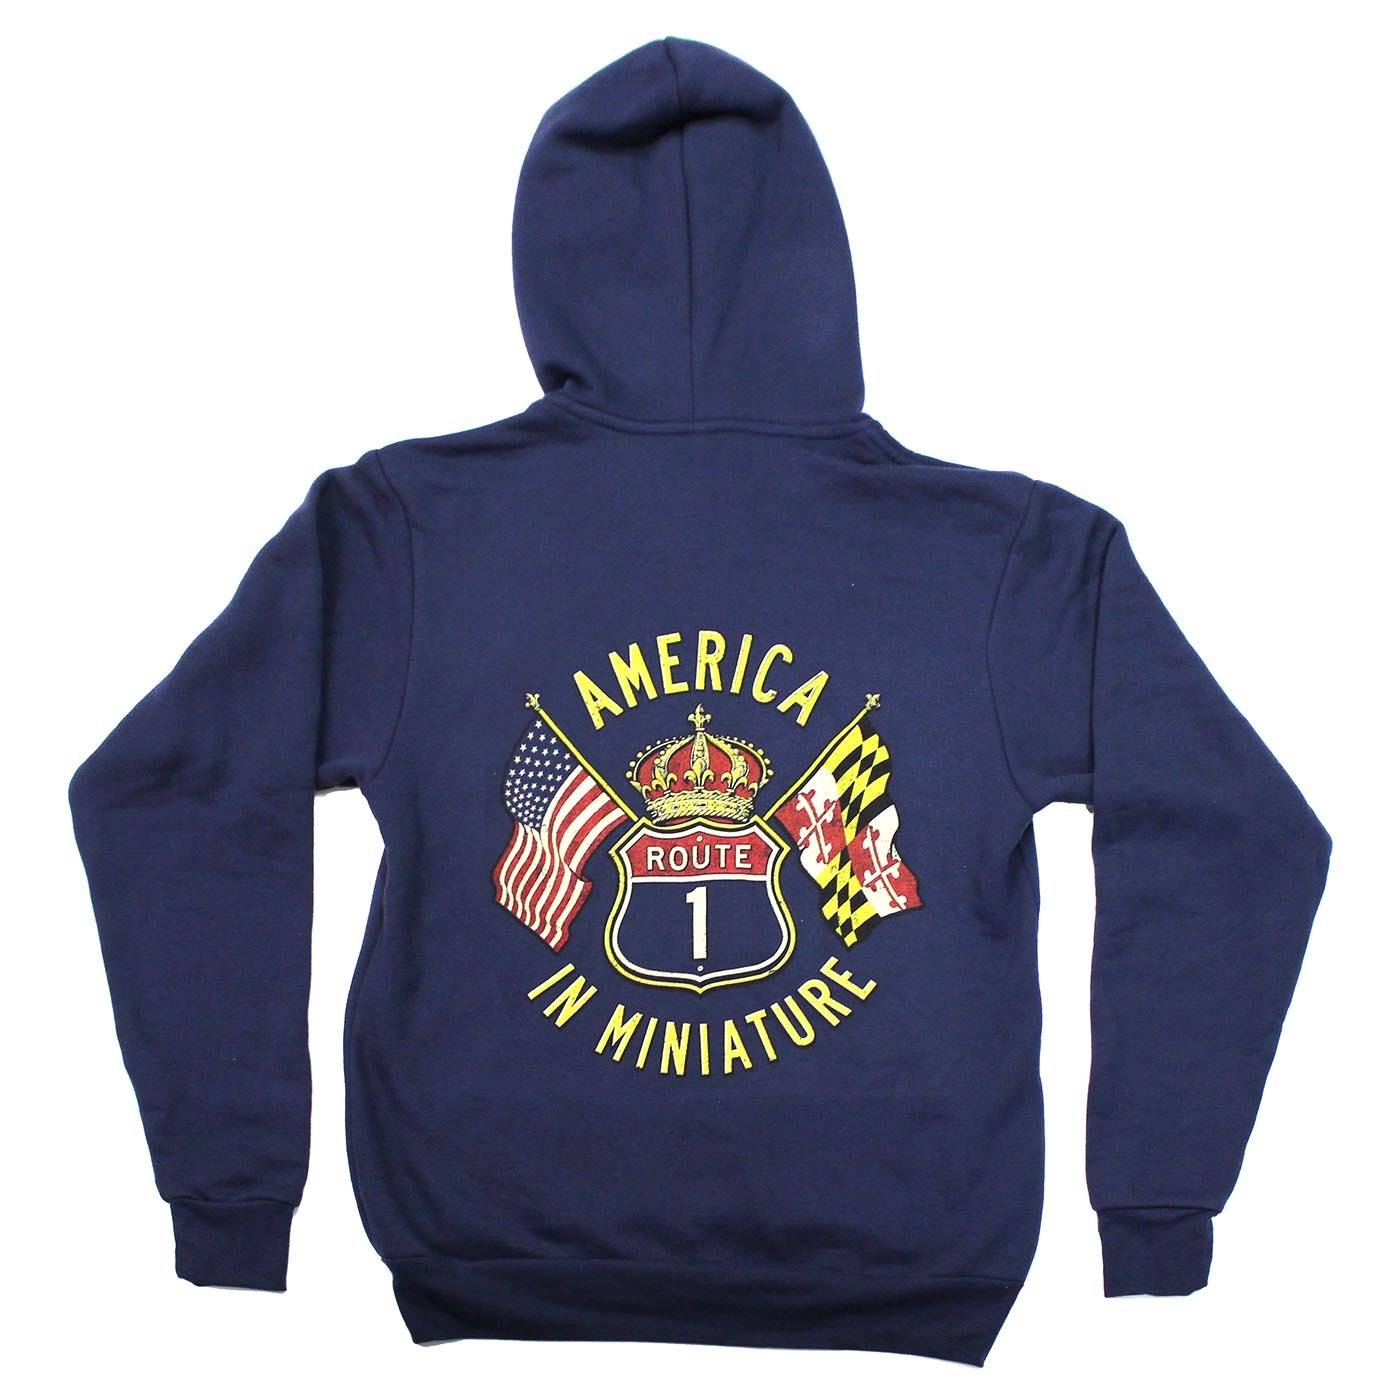 America in Miniature (Navy) / Jacket - Route One Apparel